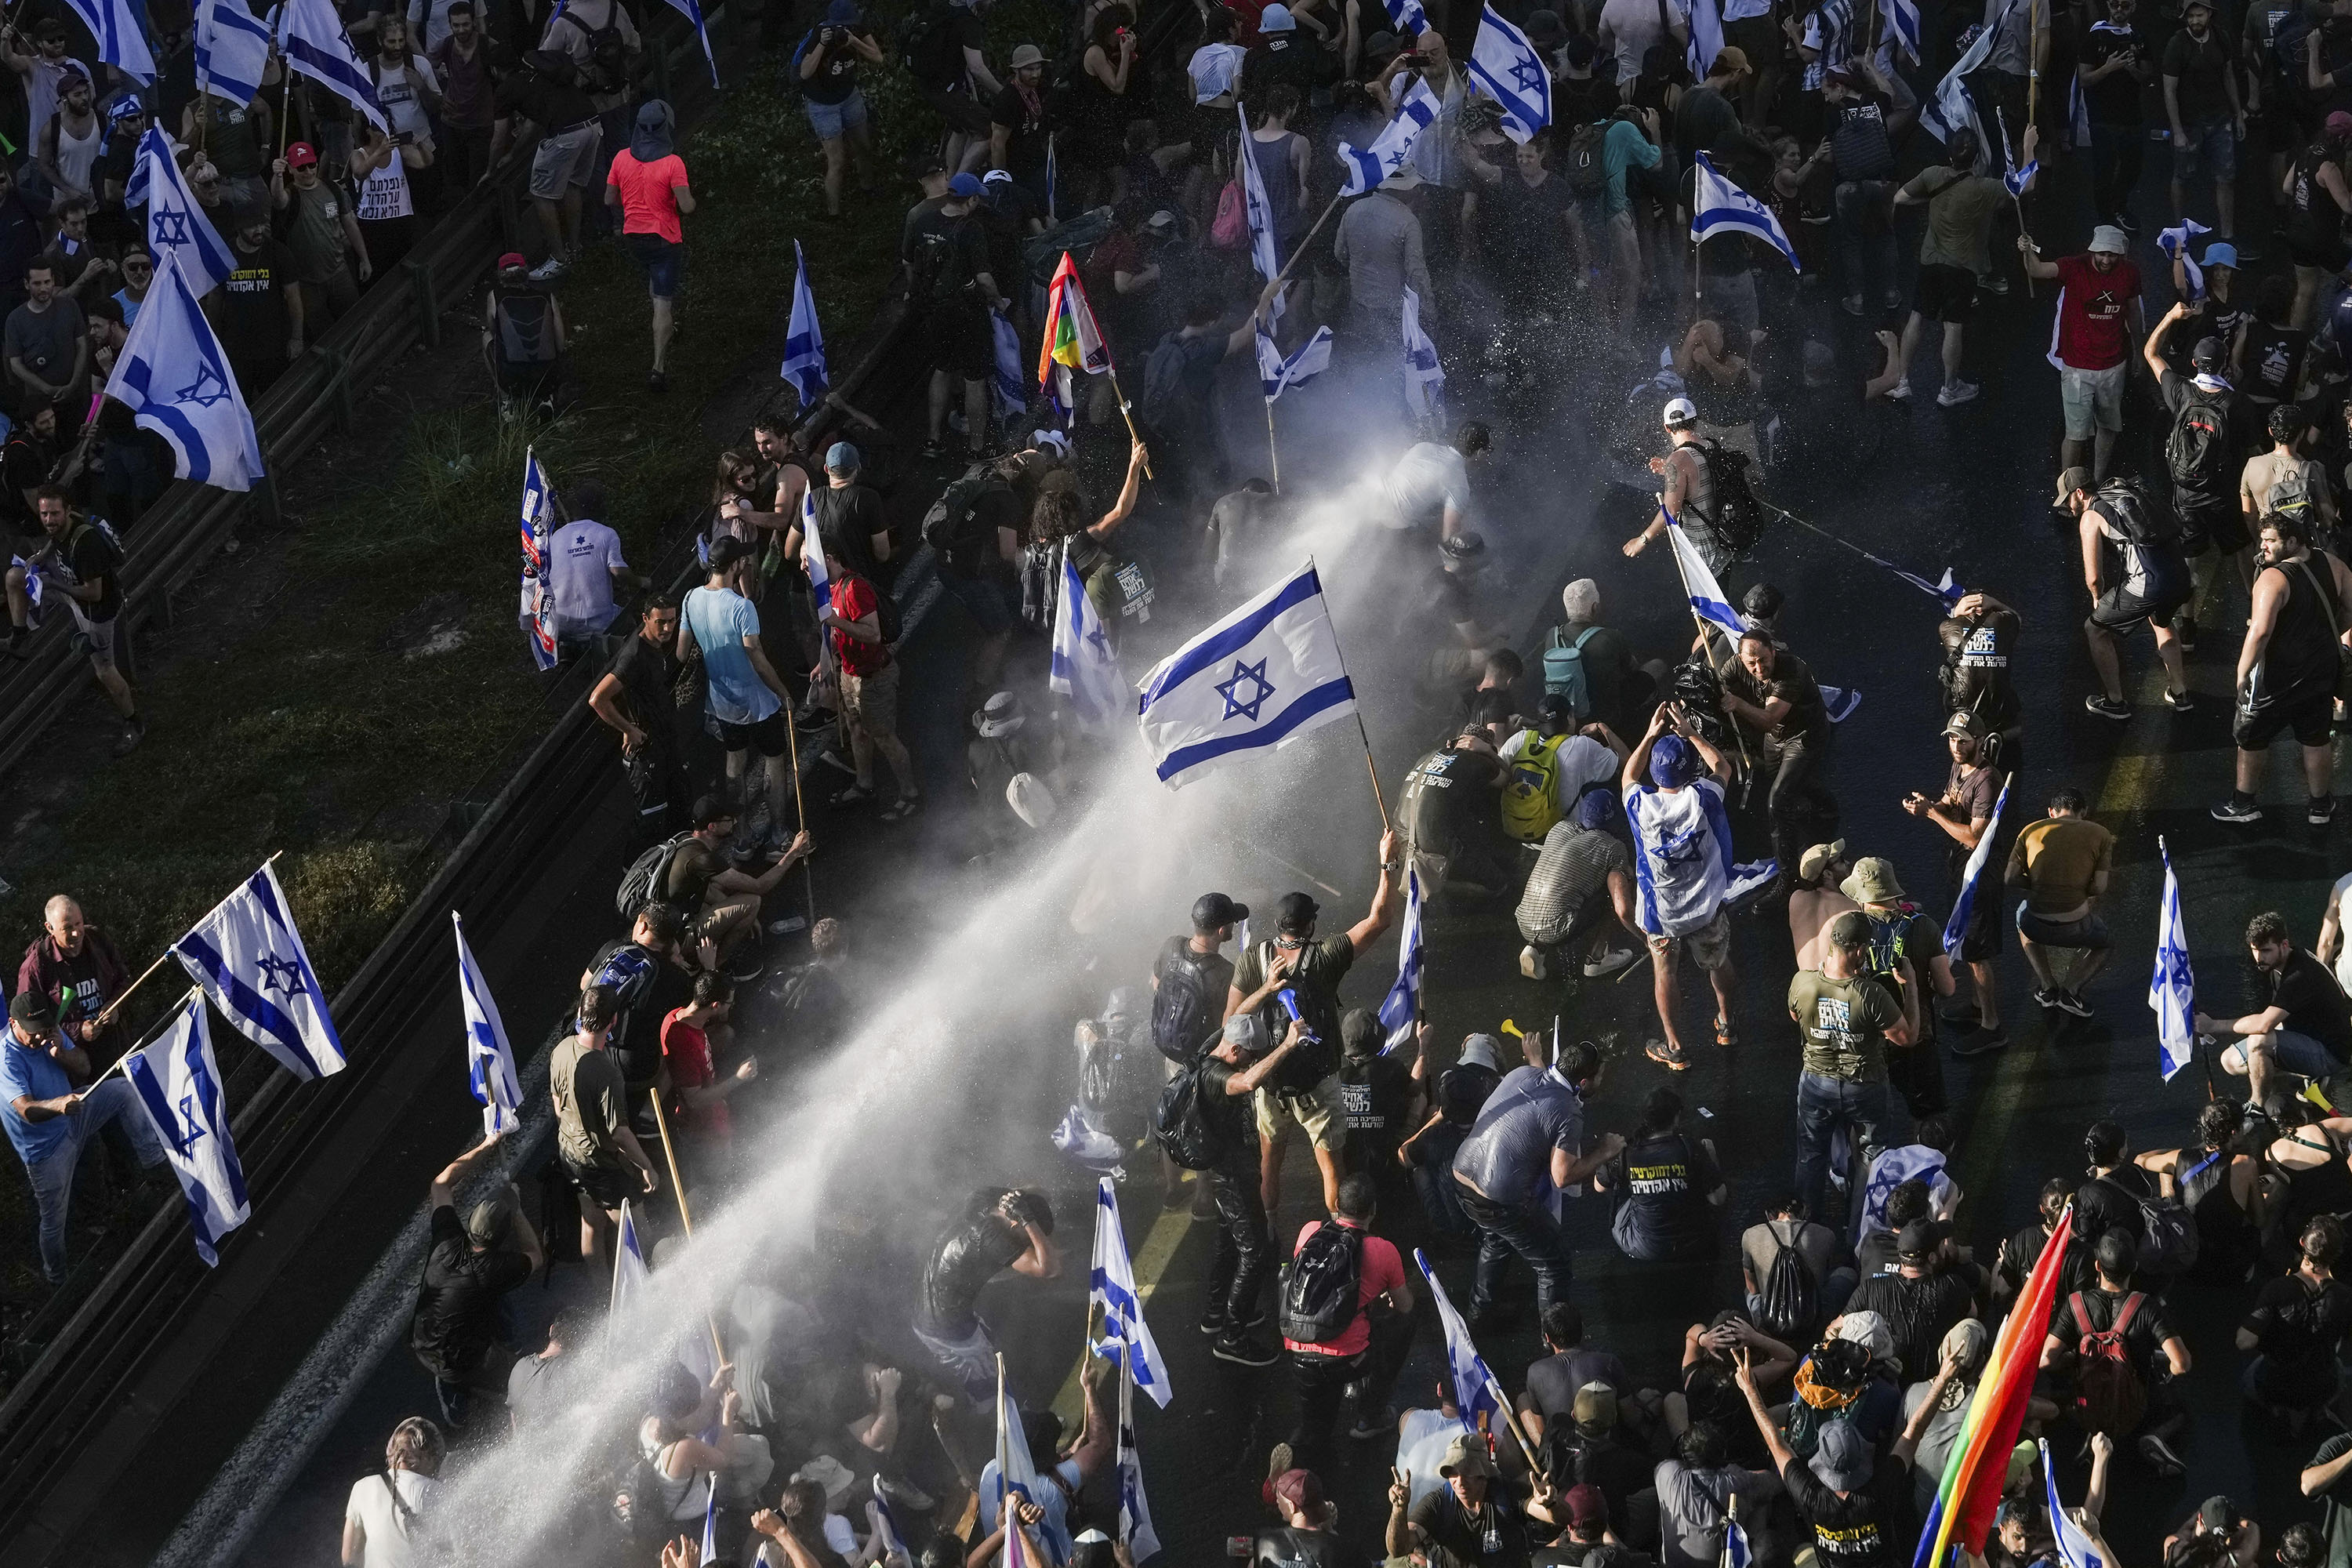 Israeli police use a water cannon to disperse demonstrators blocking a road during a protest against plans by Prime Minister Benjamin Netanyahu's government to overhaul the judicial system, in Jerusalem, Monday, July 24.